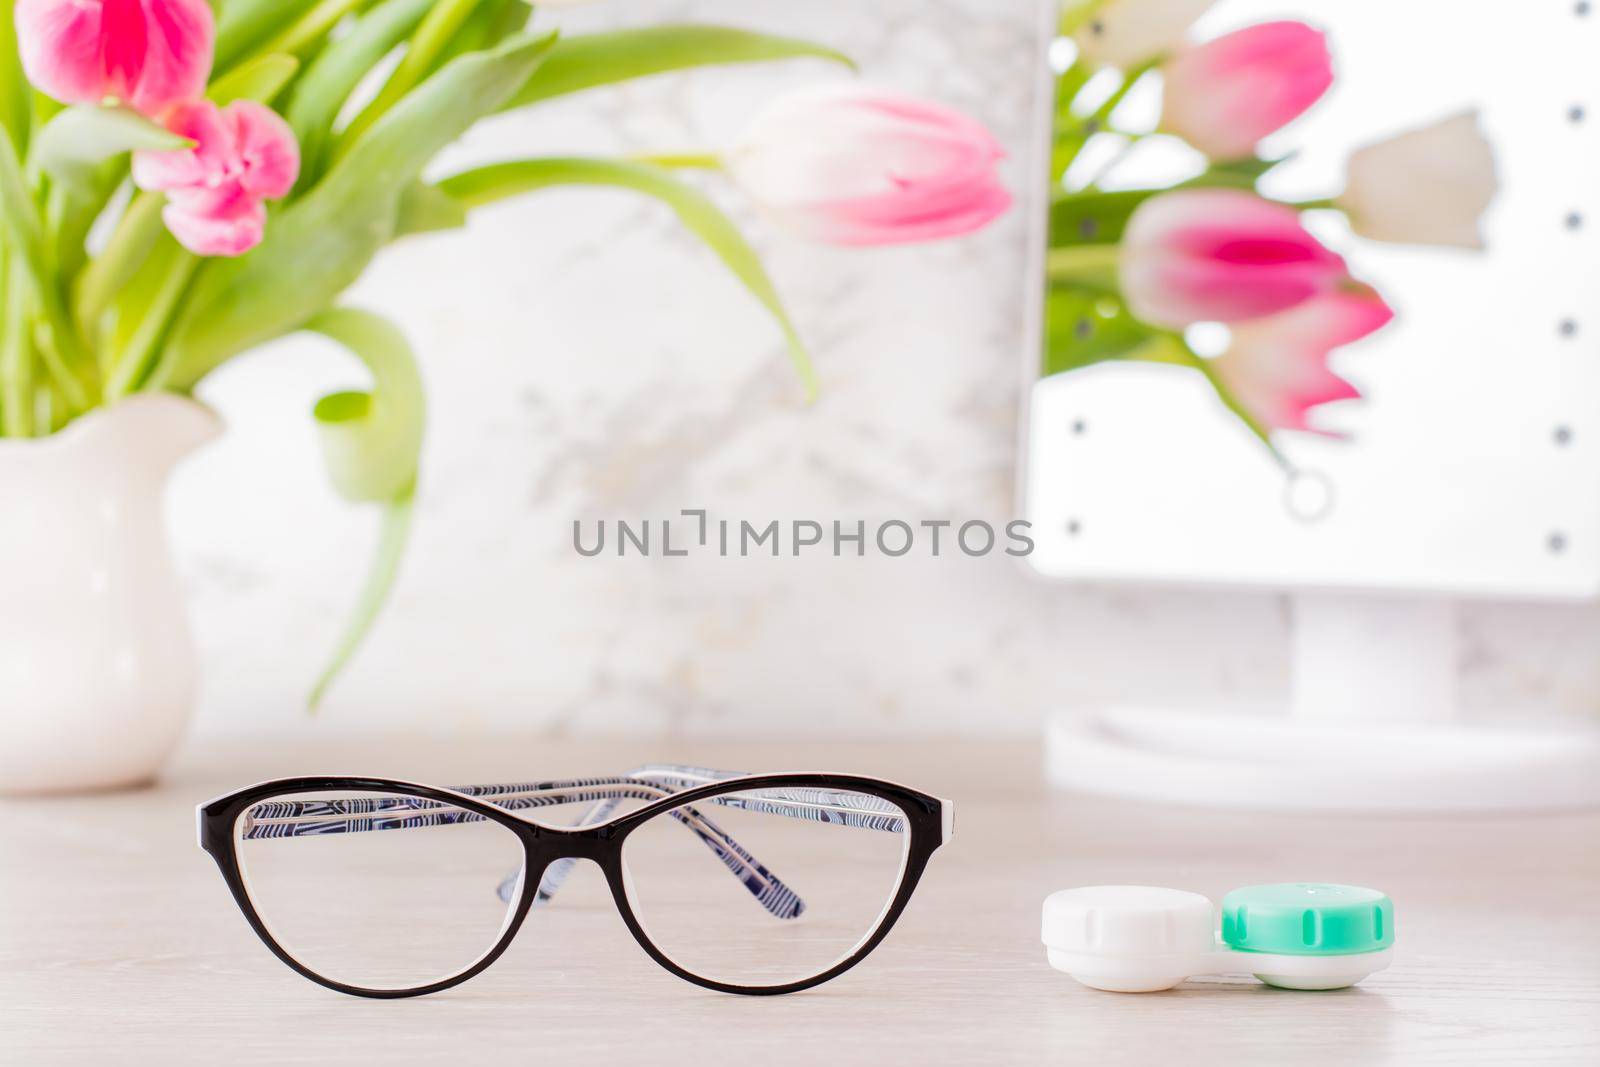 Low vision and the choice between glasses and lenses. A container for lenses and glasses in front of a mirror on the table and a bouquet of tulips in a vase